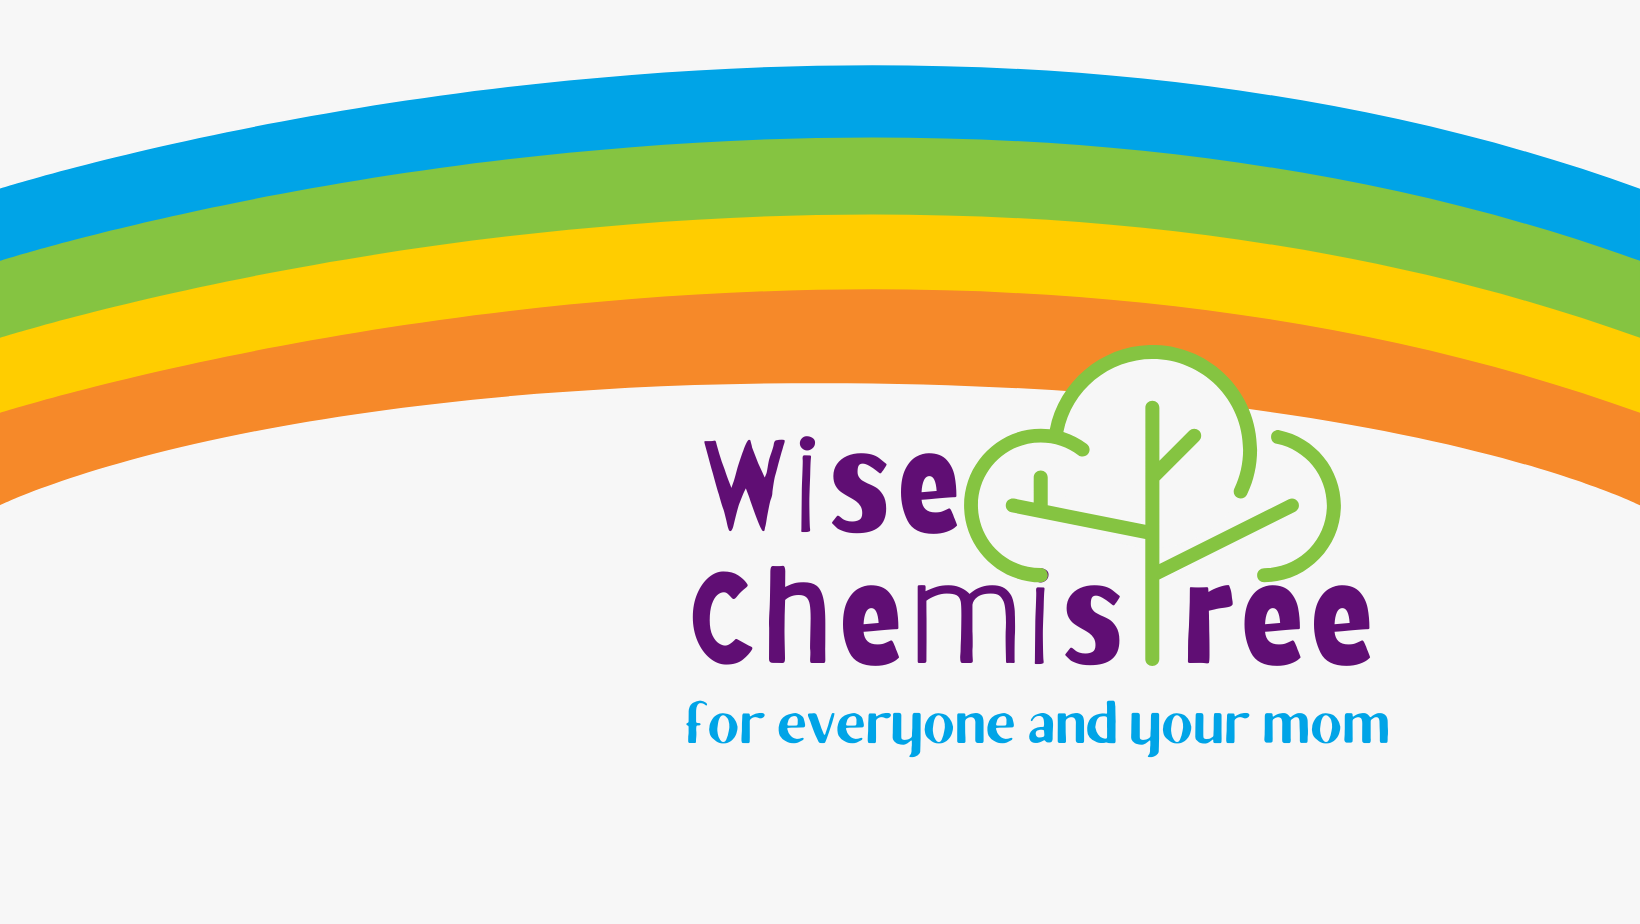 Wise Chemistree logo with rainbow and tree. With tagline "for everyone and your mom"